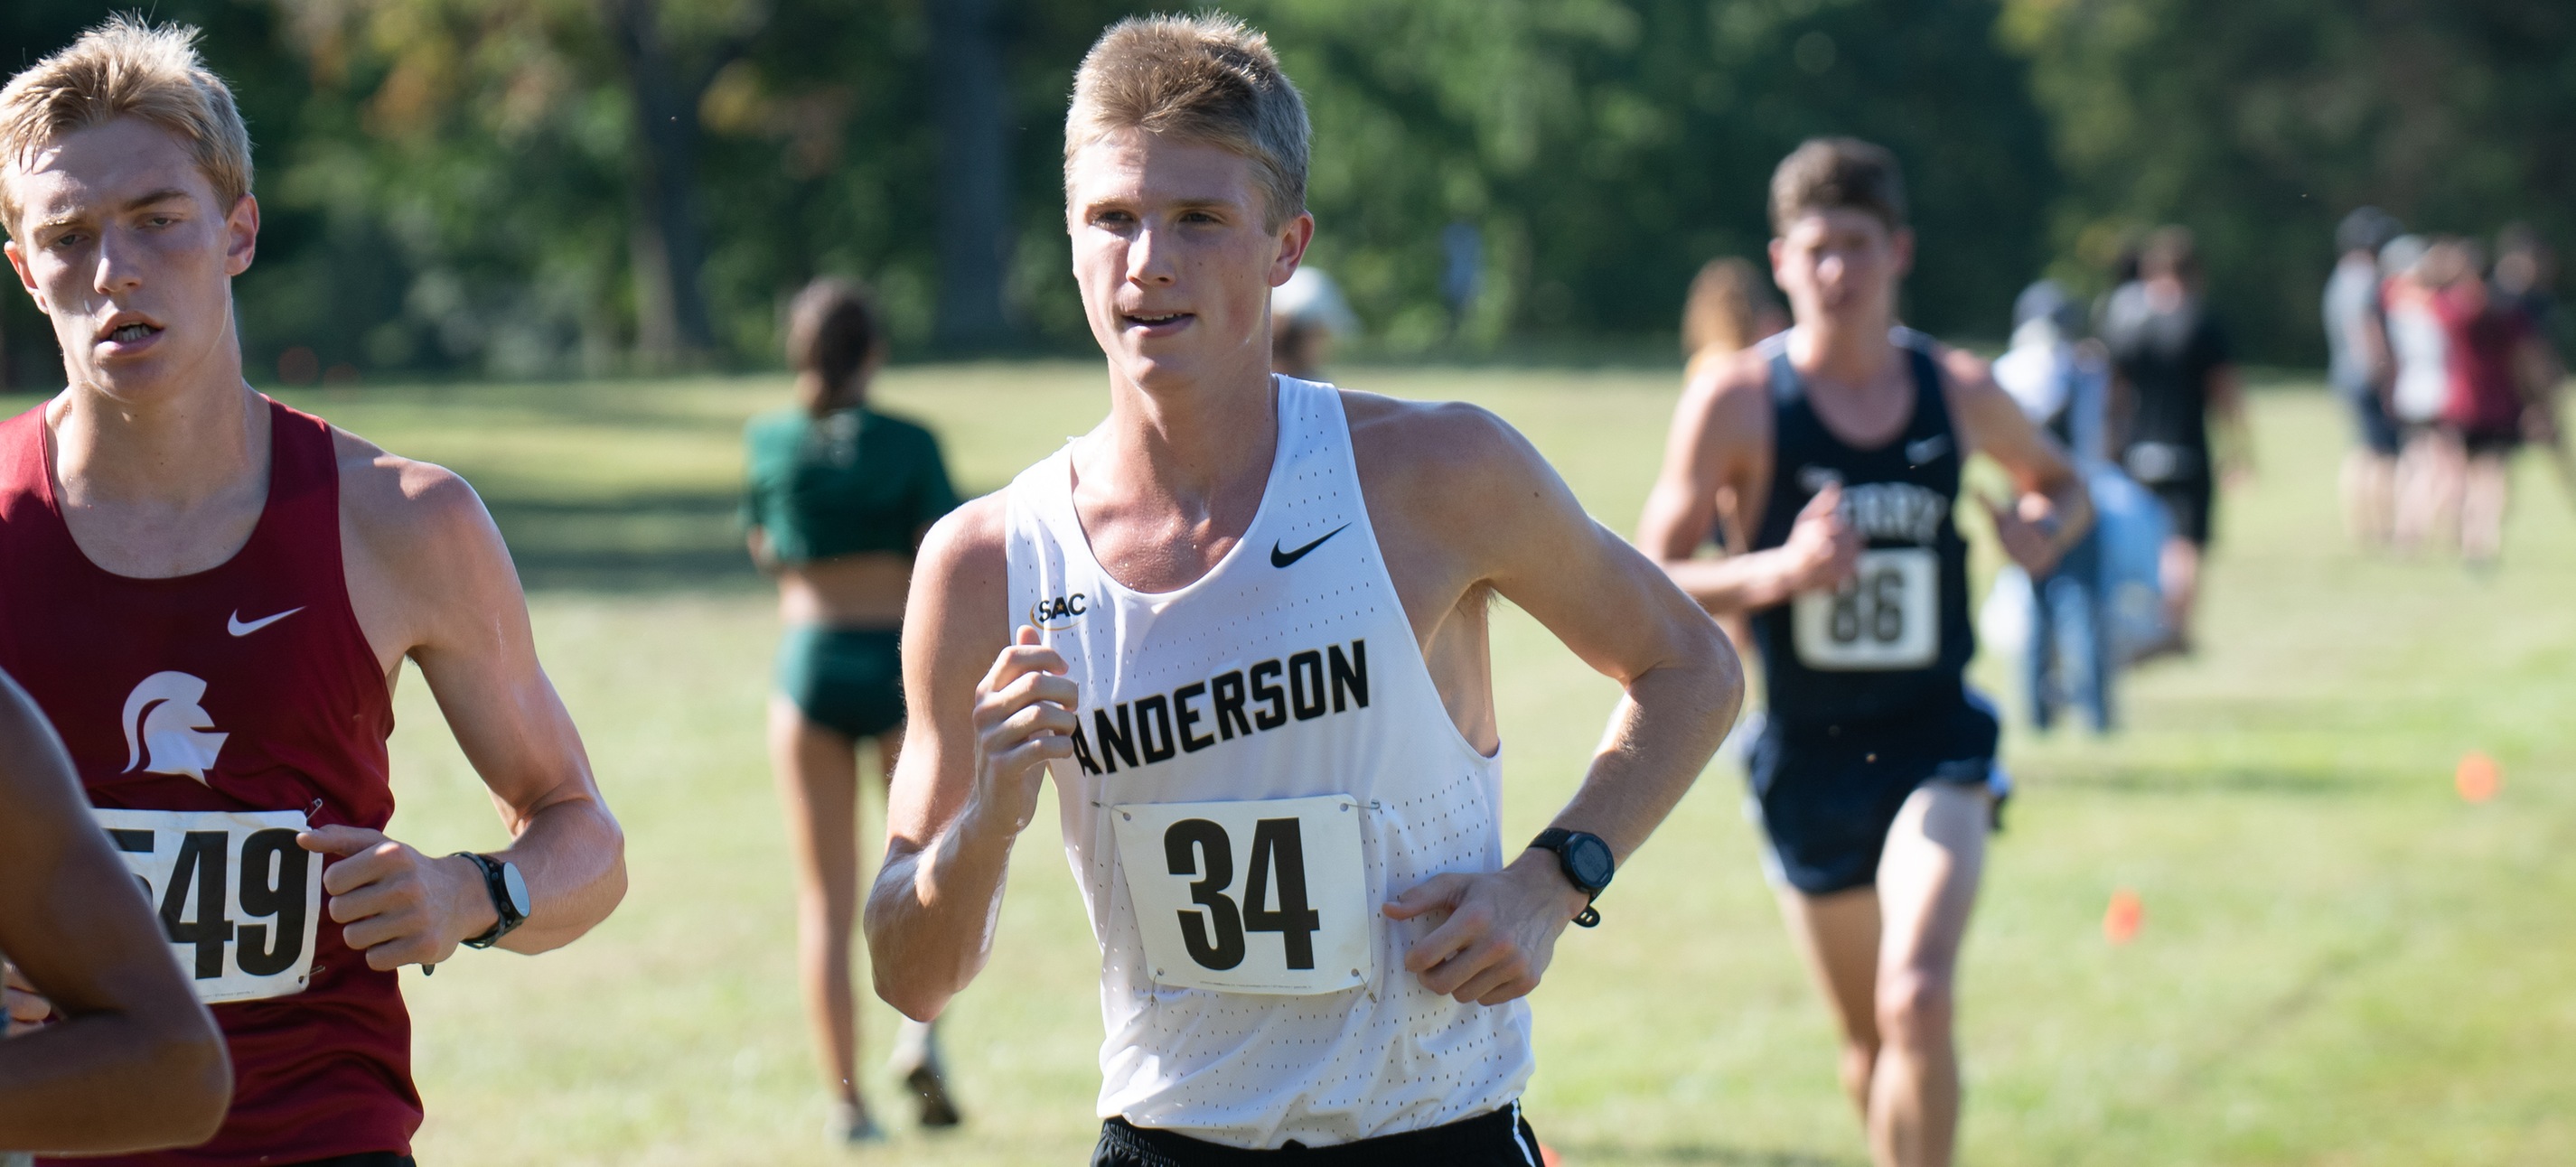 Men's Cross Country Finishes 9th at Lewis Crossover